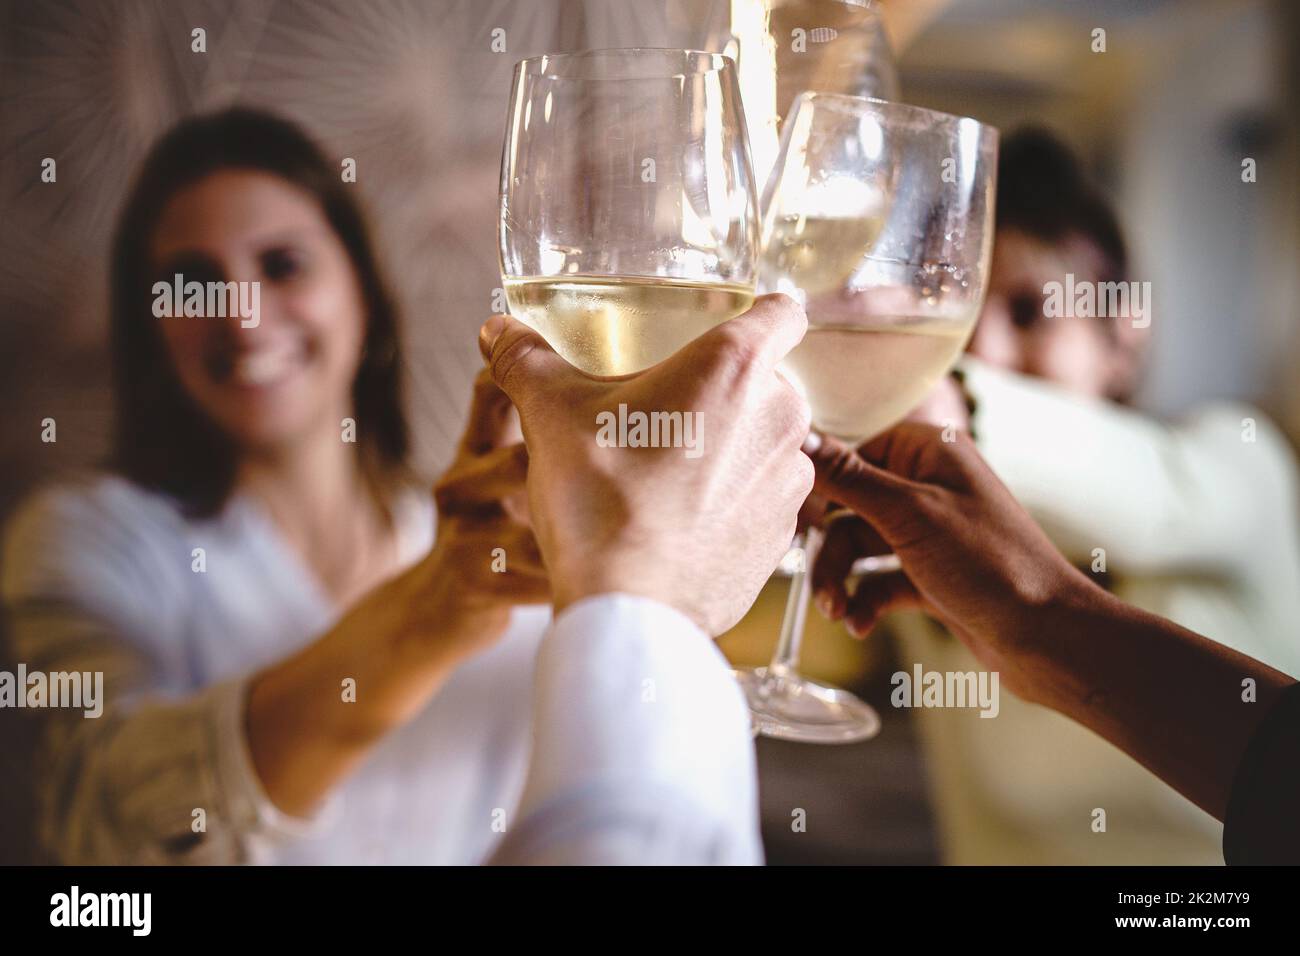 Cheerful group of people having fun toasting and drinking white wine sitting at restaurant table - friends raising glasses for a celebratory toast - f Stock Photo